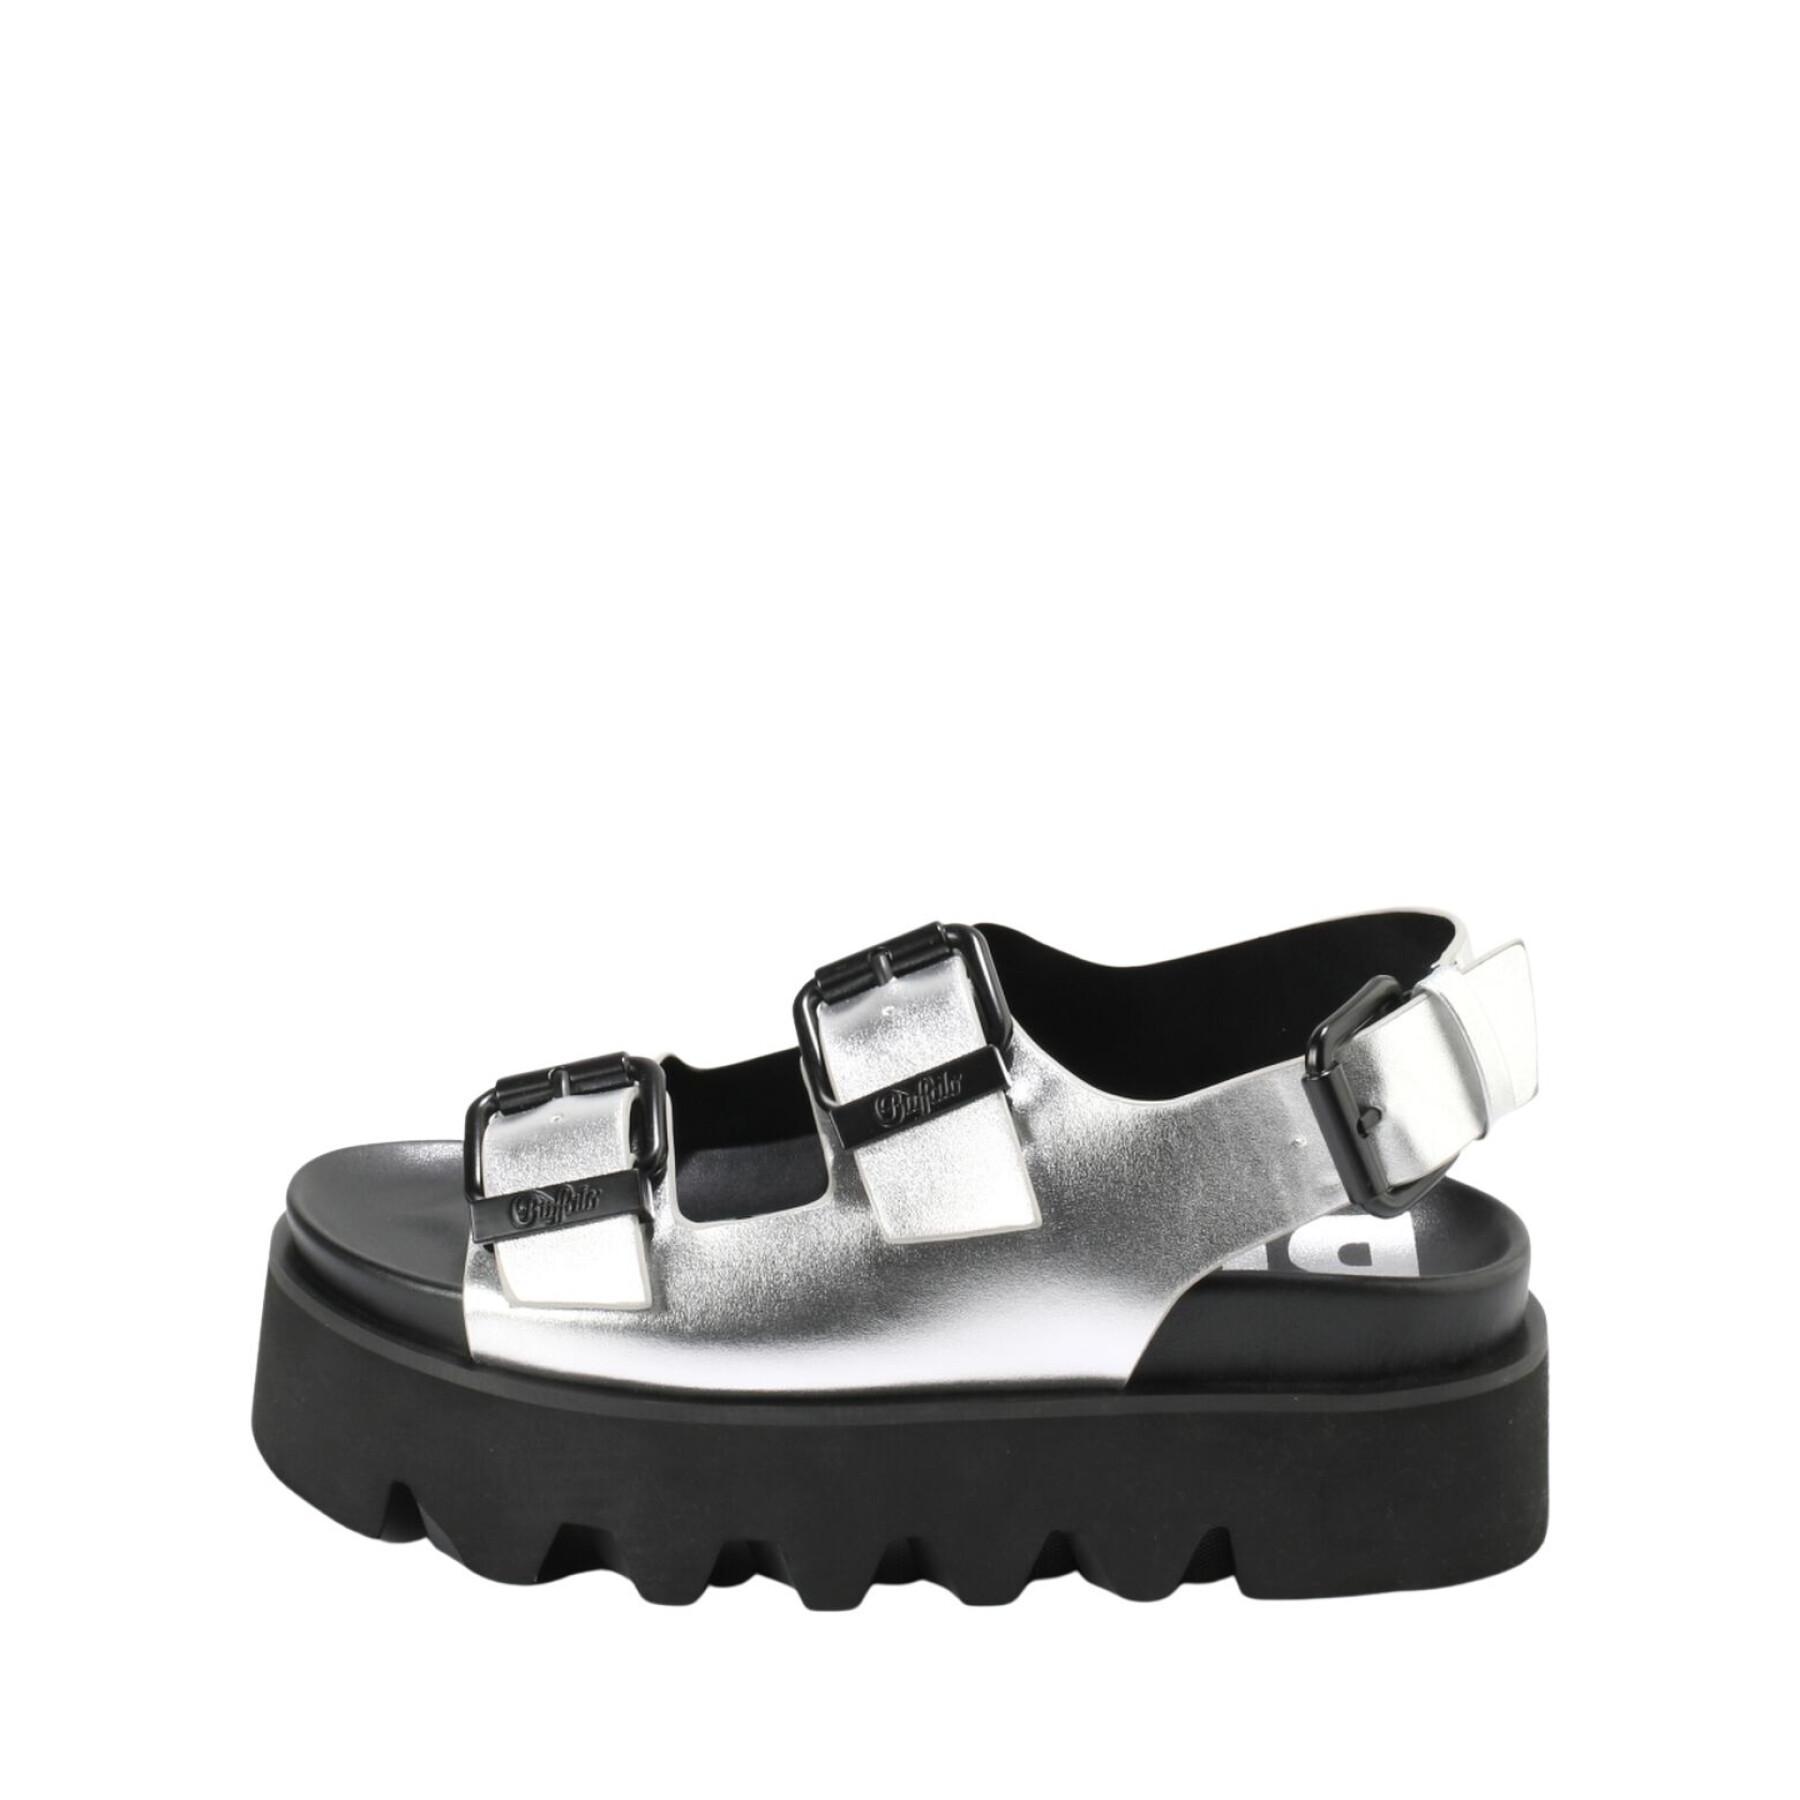 Women's sandals Buffalo Perry on